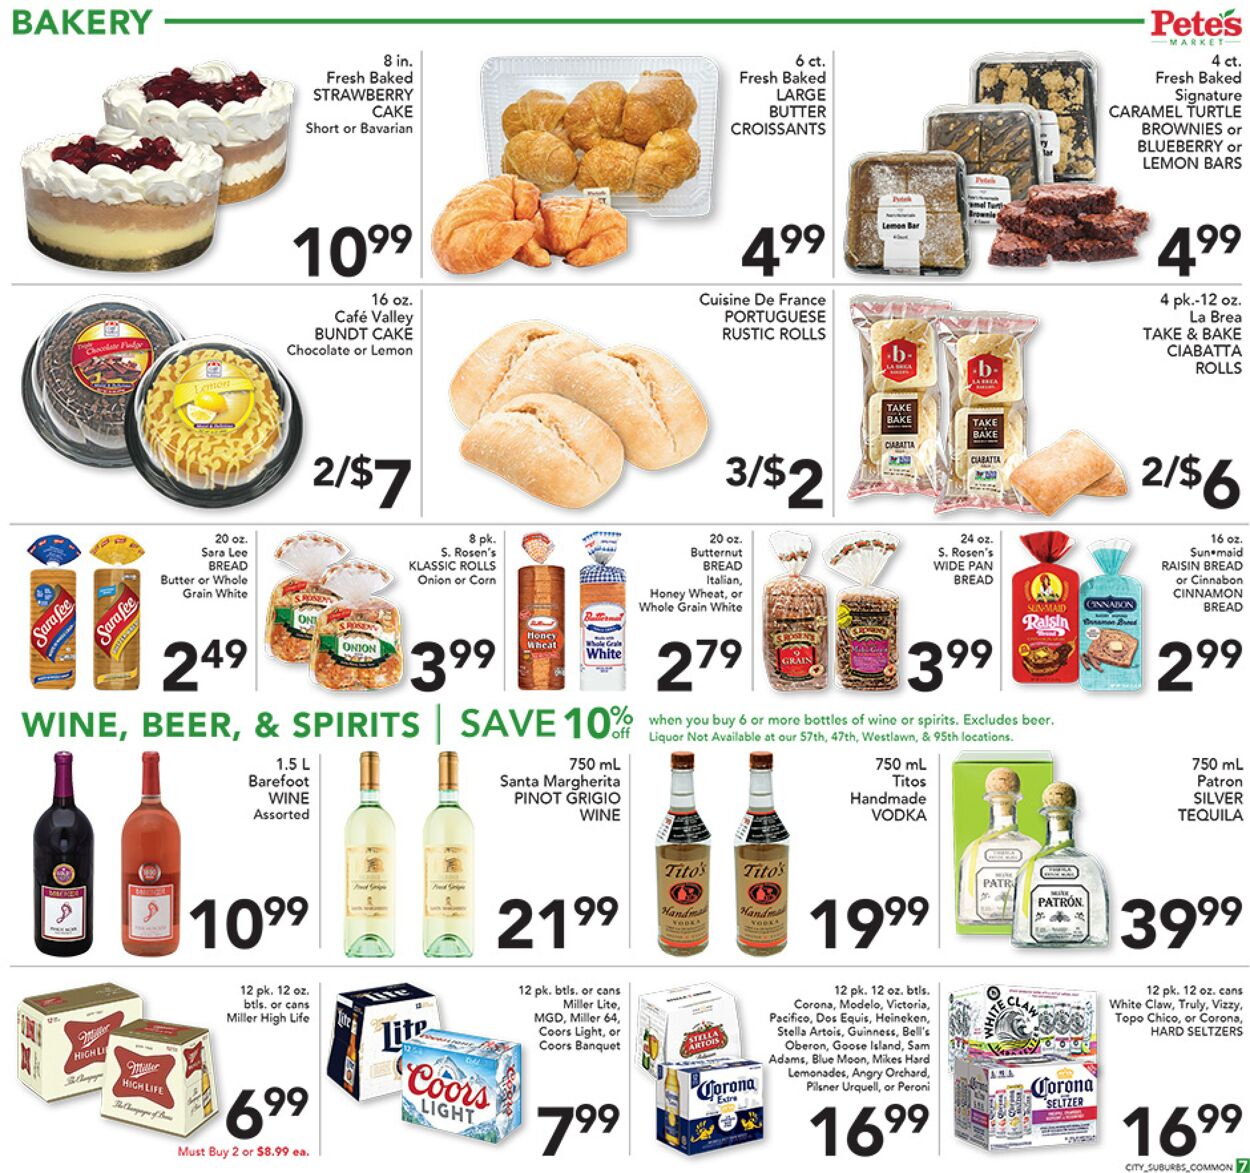 Weekly ad Pete's Fresh Market 02/22/2023 - 02/28/2023